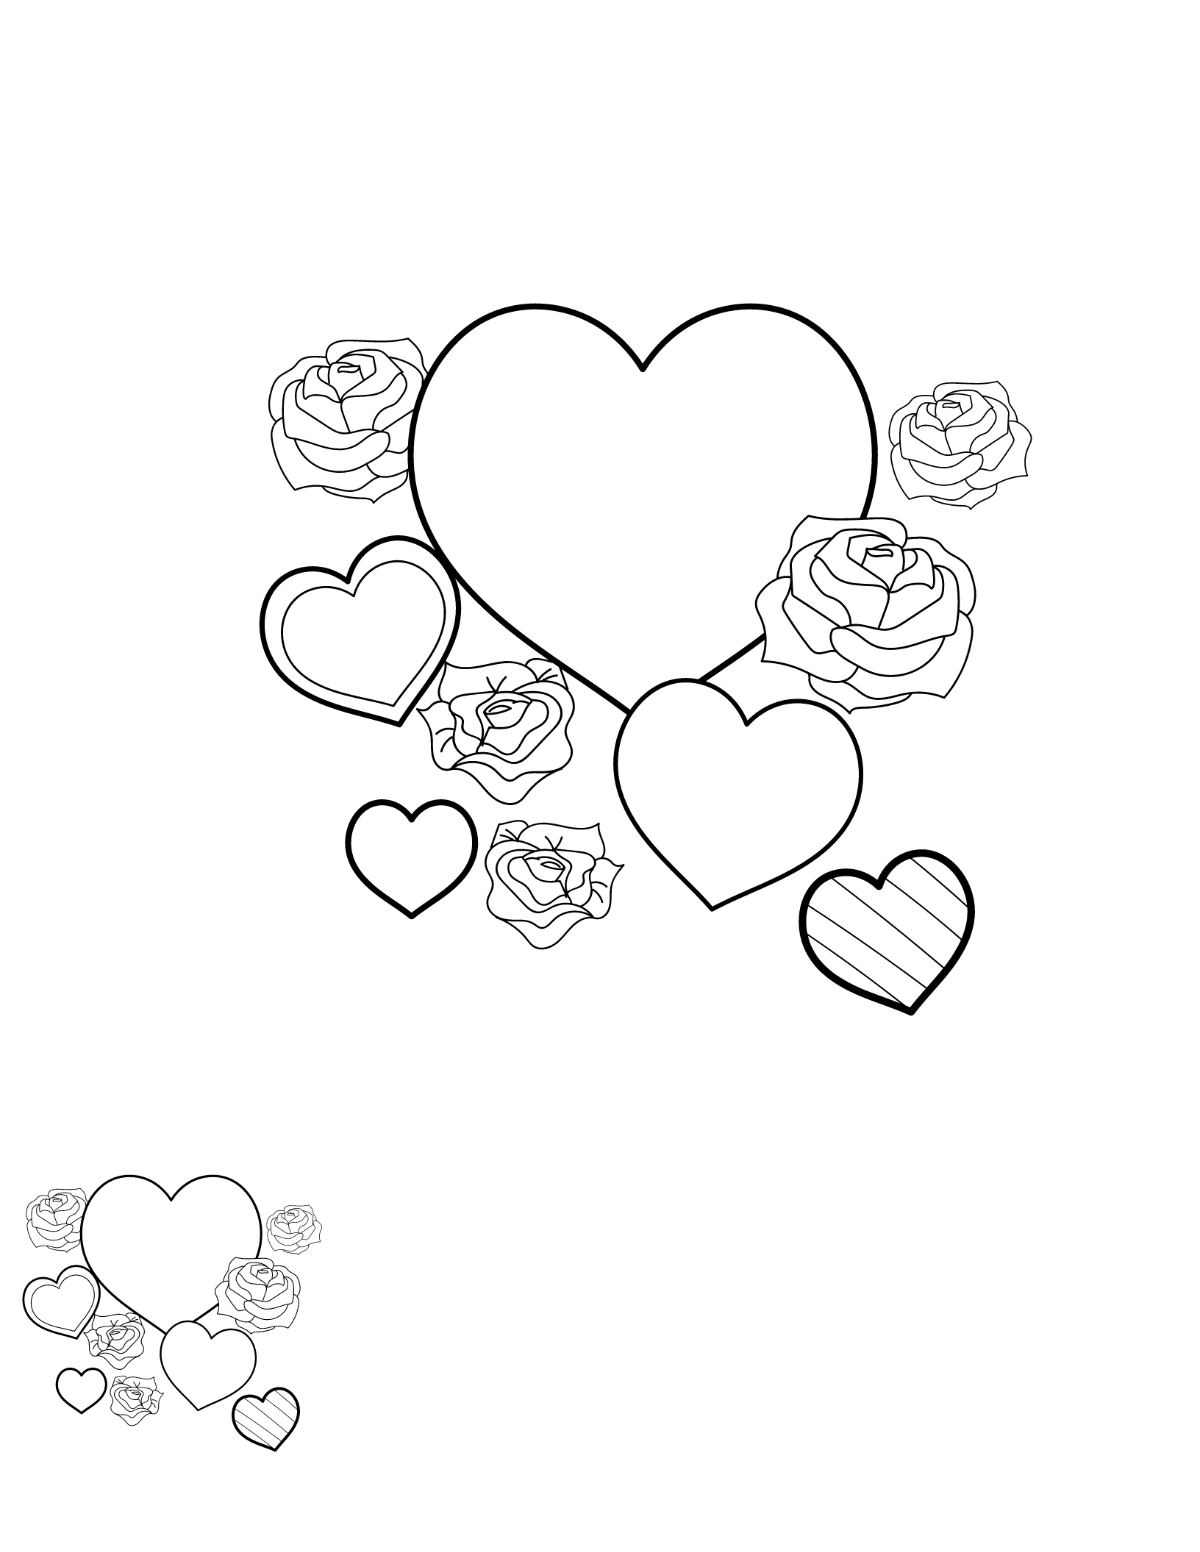 Hearts and Roses Coloring Page Template